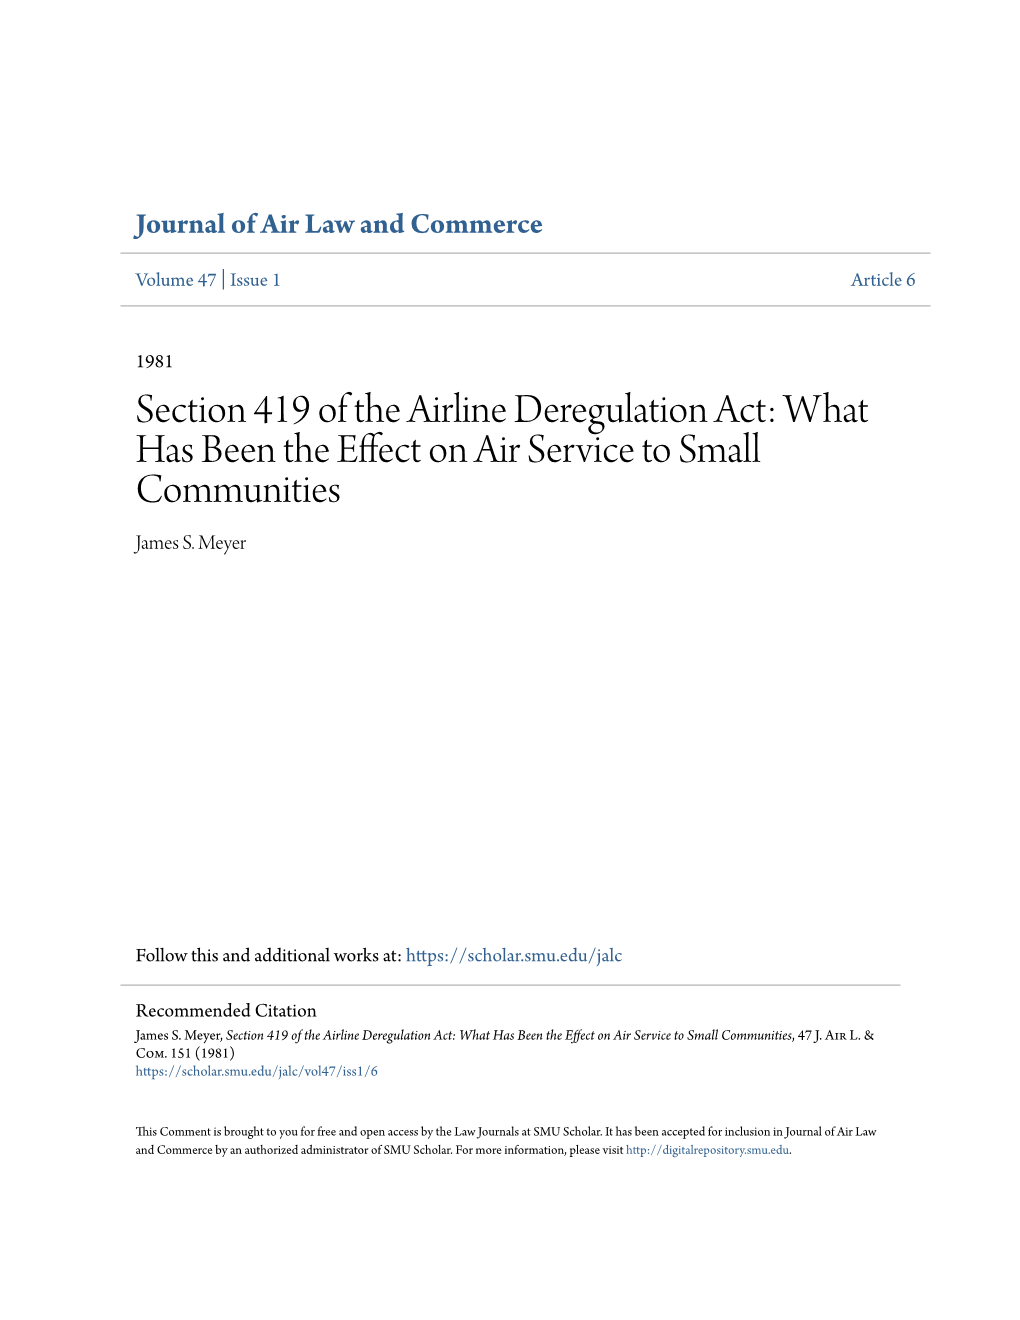 Section 419 of the Airline Deregulation Act: What Has Been the Effect on Air Service to Small Communities James S